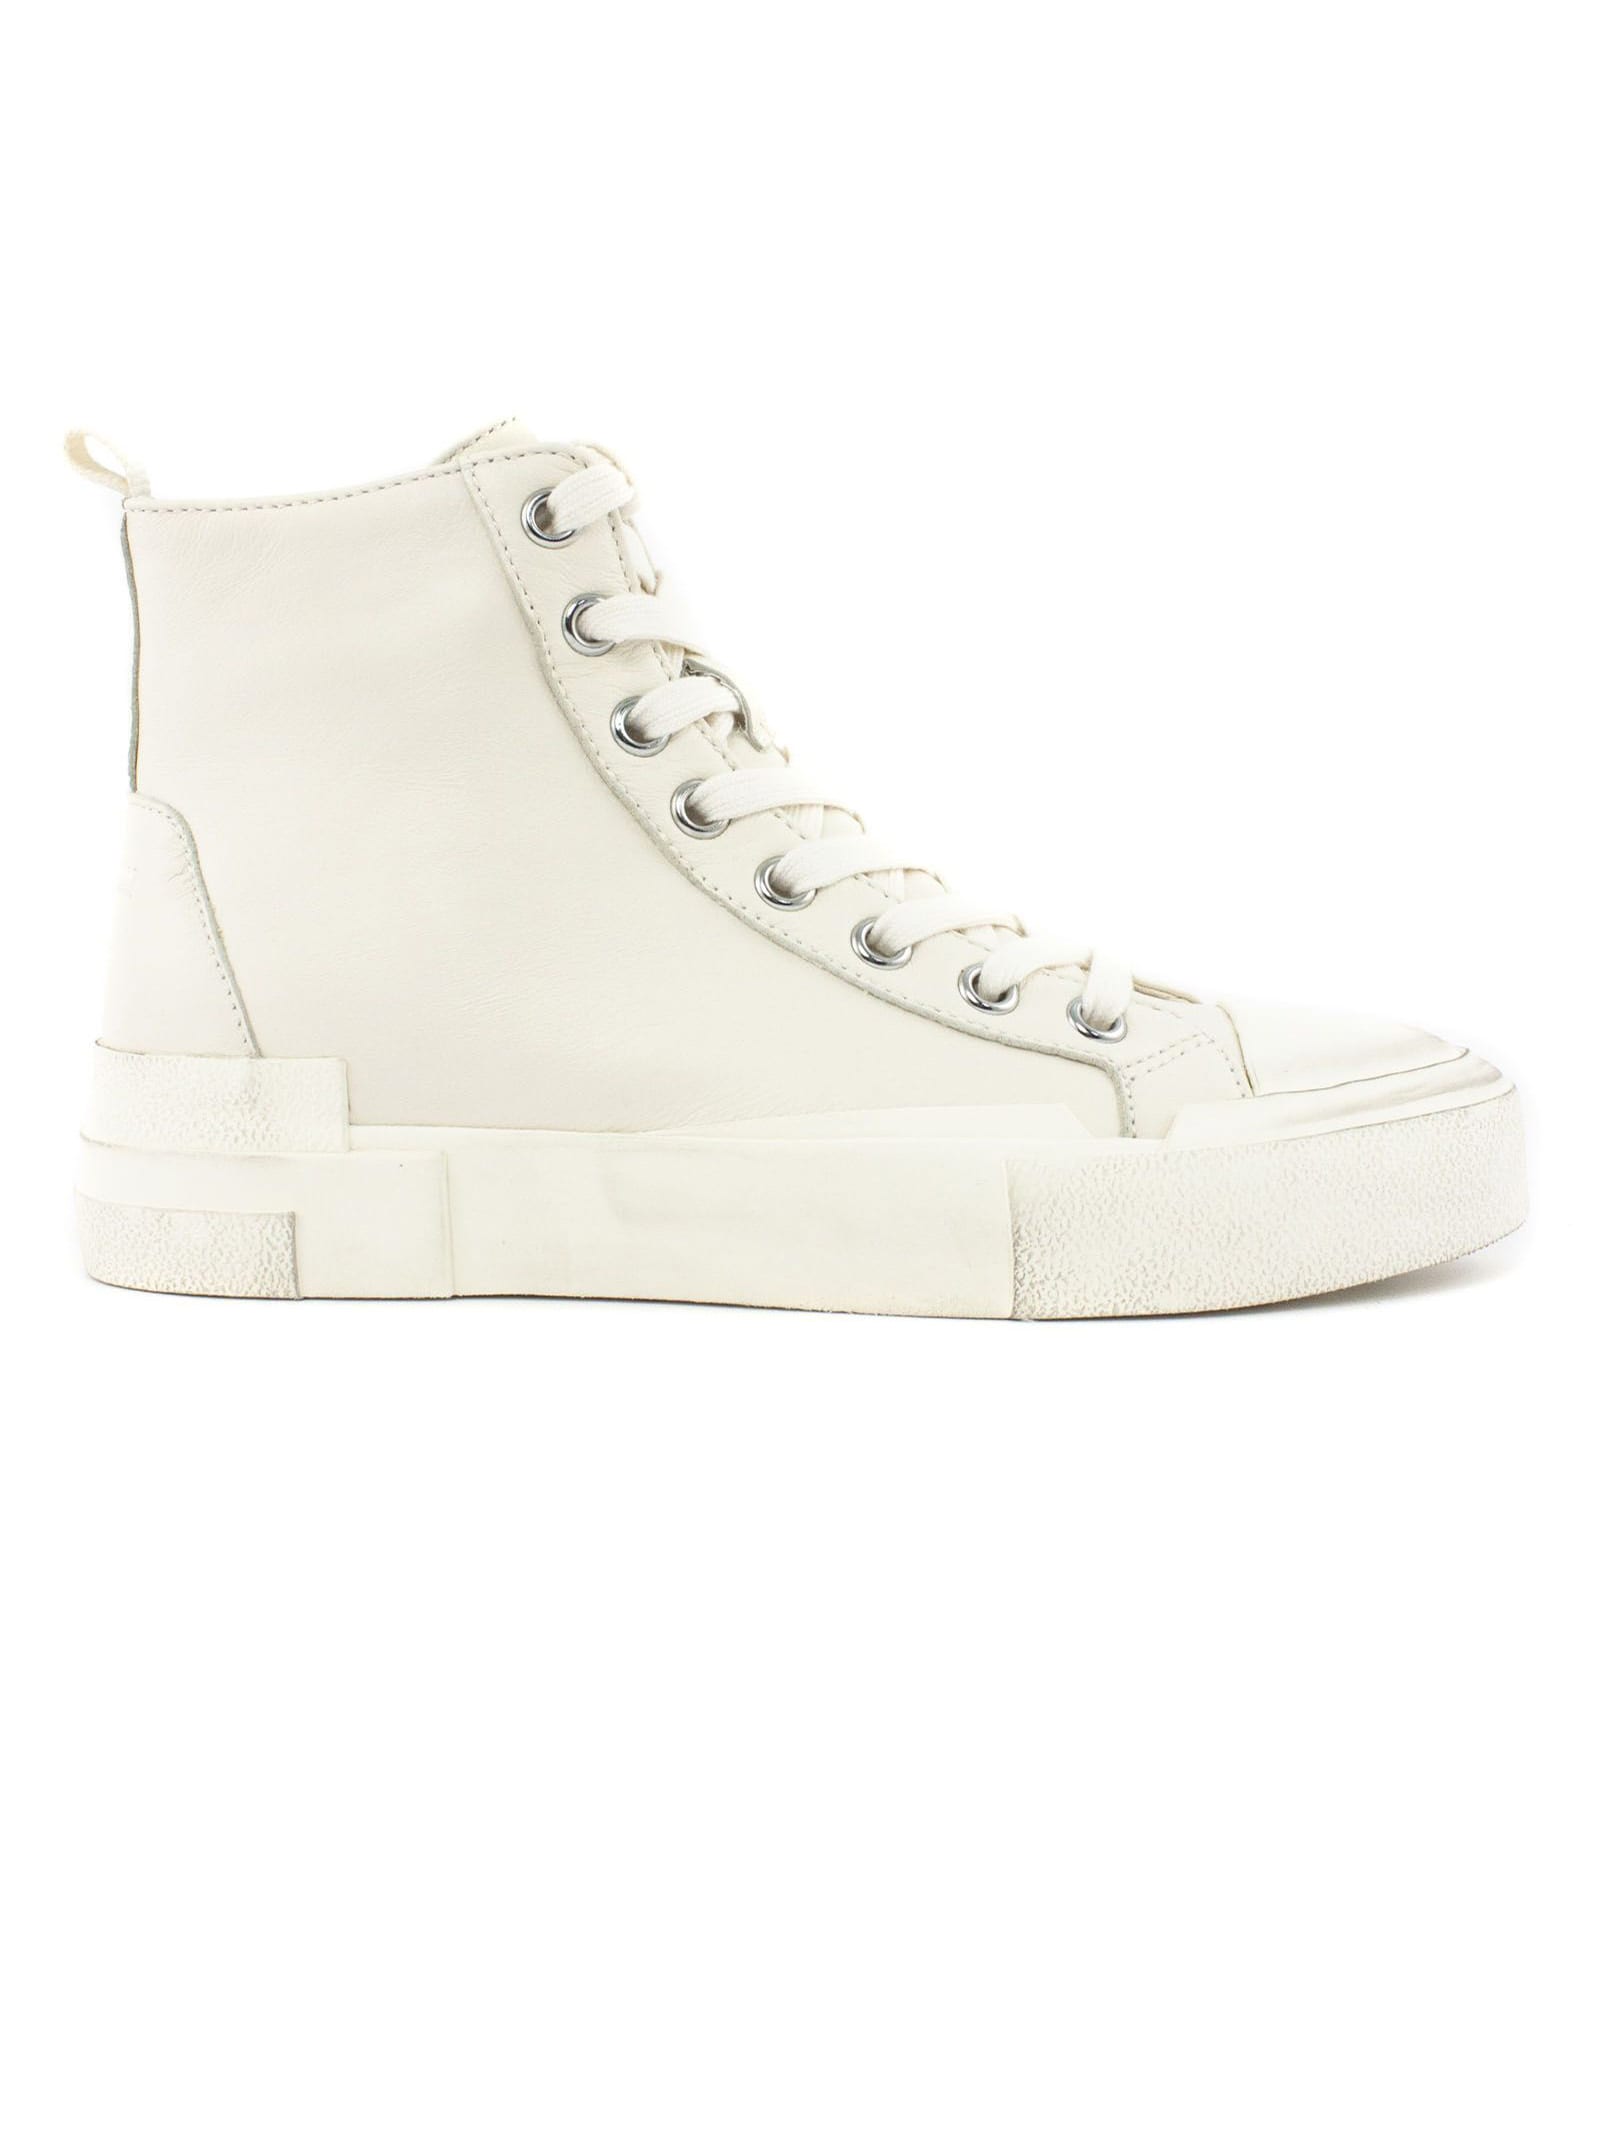 Ash White Hi-top Ghibly Sneakers